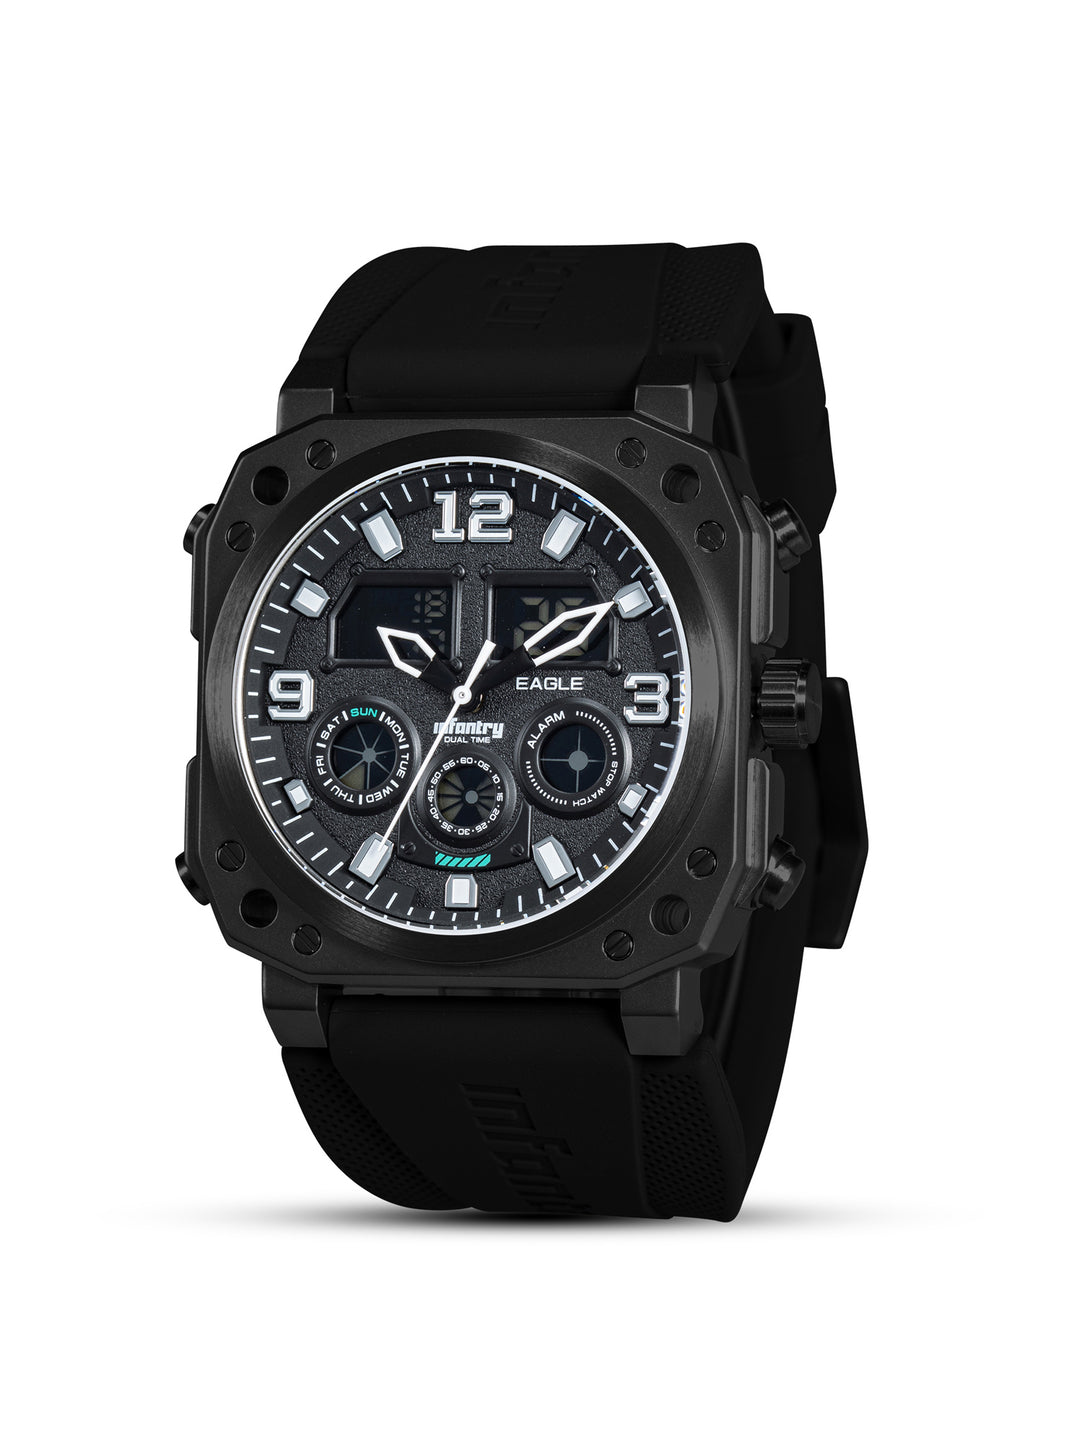 The Eagle Multifunction Dual Timer Ana-Dig Men's Watch - FS-011-BLK-BR